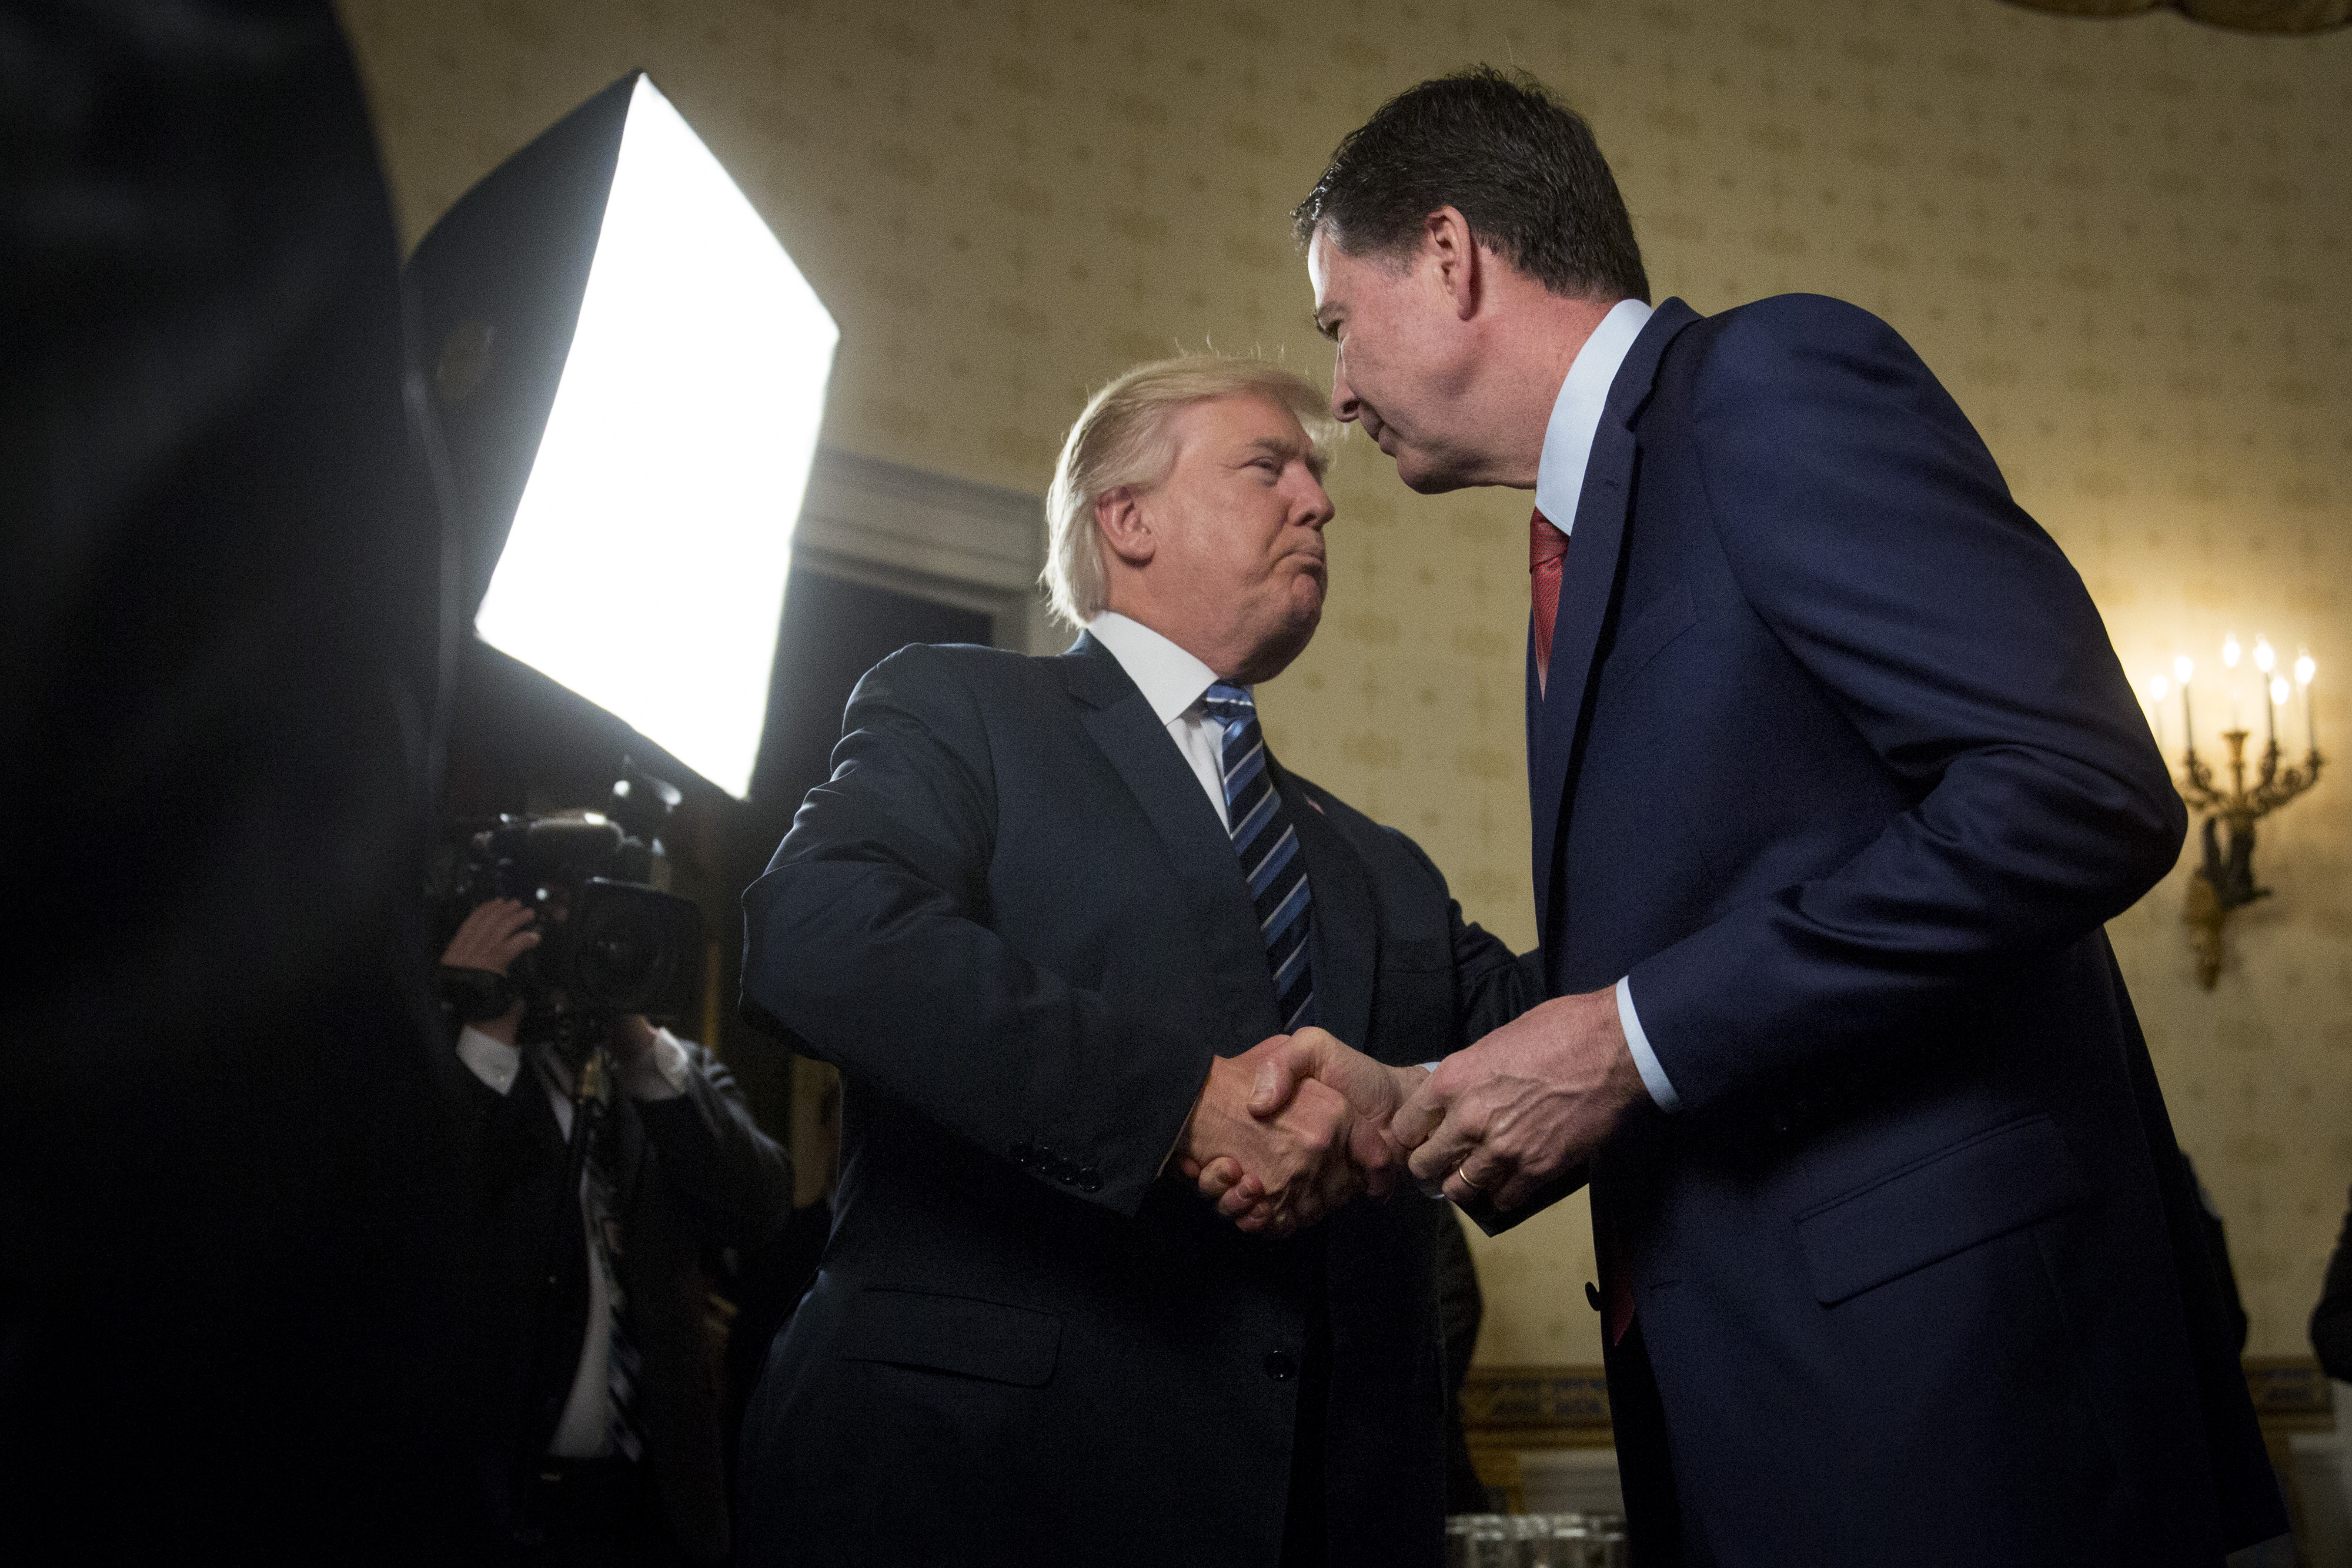 U.S. President Donald Trump, left, shakes hands with James Comey, director of the Federal Bureau of Investigation (FBI), during an Inaugural Law Enforcement Officers and First Responders Reception in the Blue Room of the White House in Washington, D.C., on Jan. 22, 2017. (Andrew Harrer—Bloomberg via Getty Images)